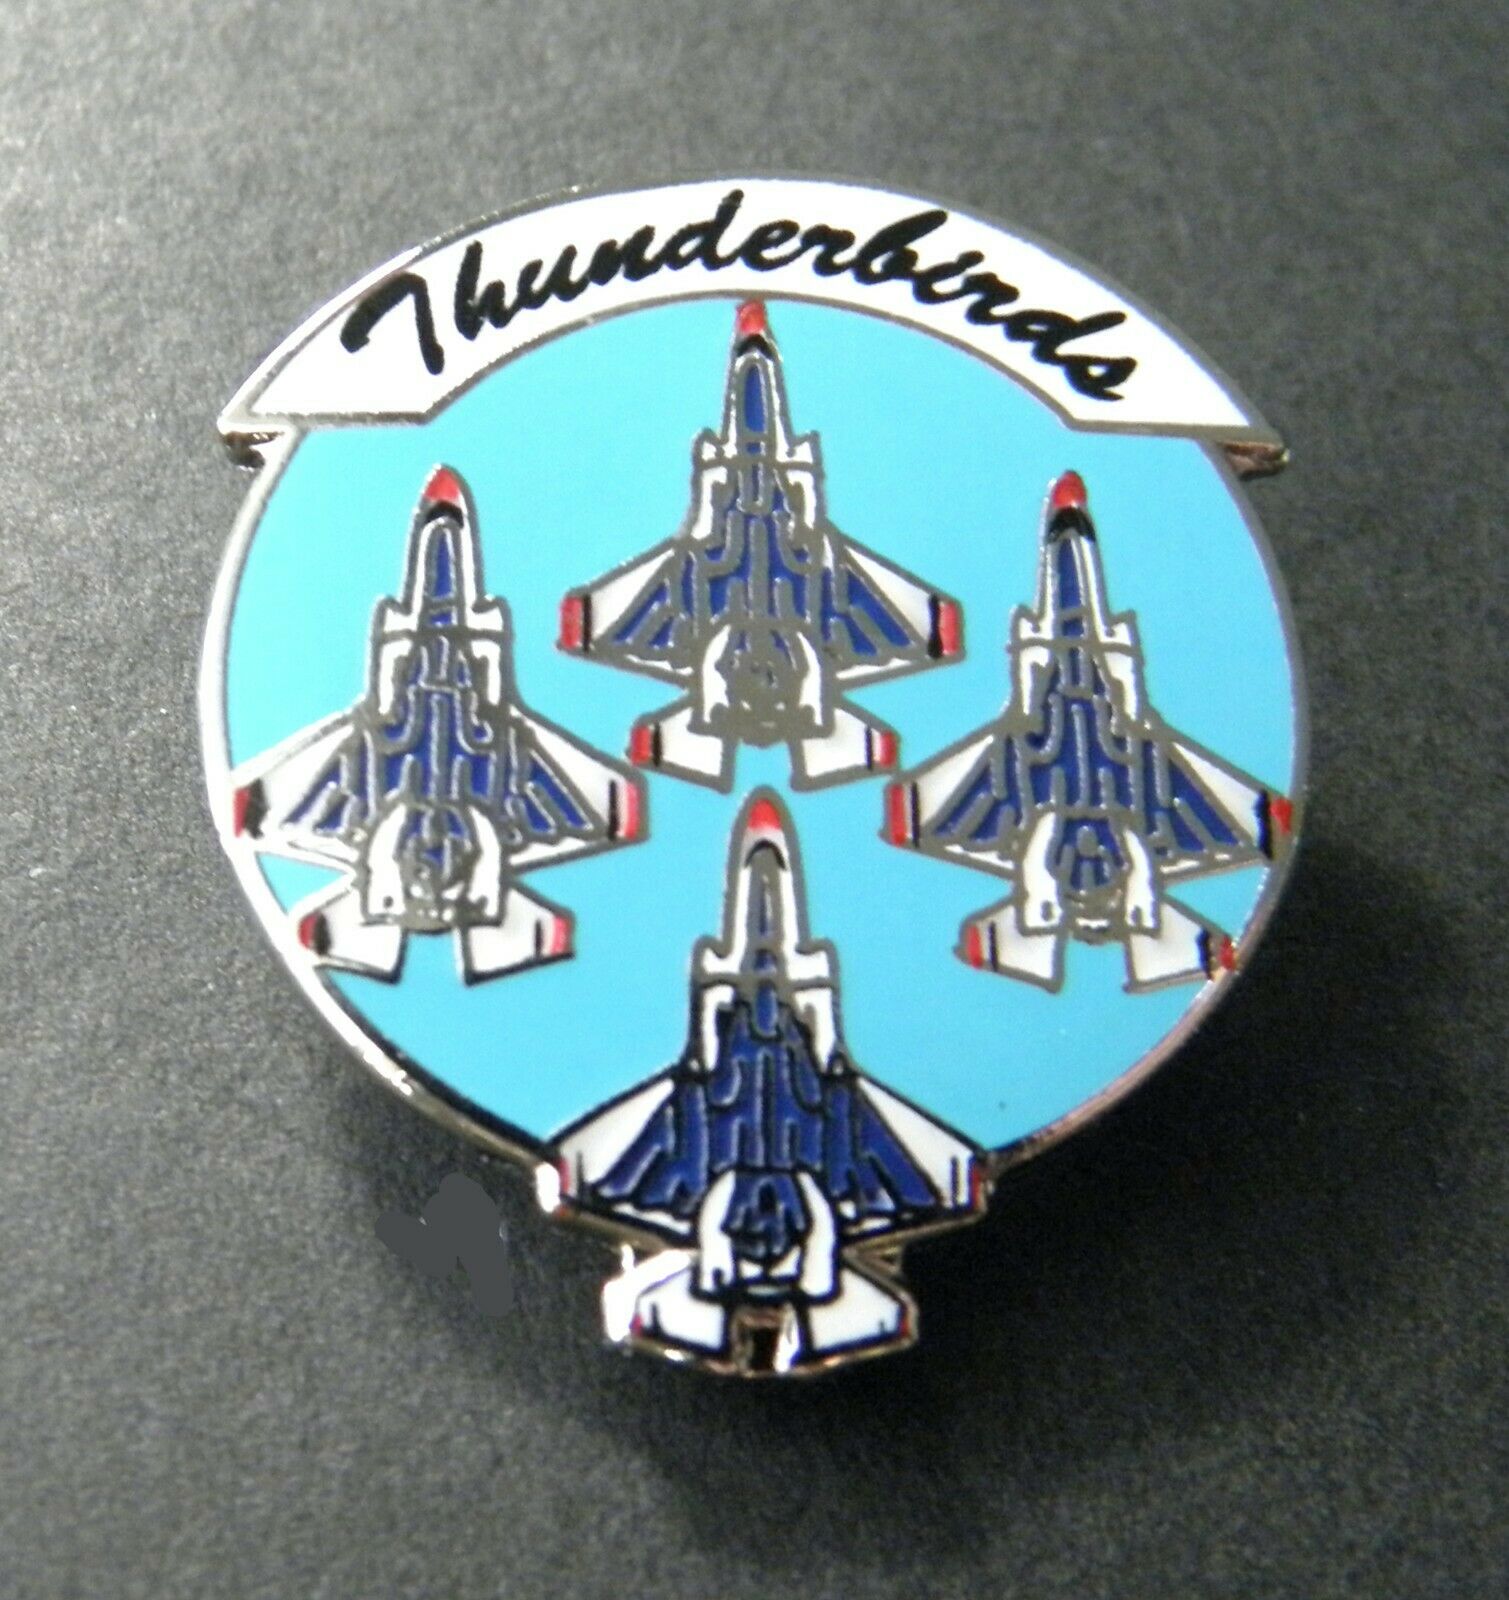 Details about   United States Air Force Thunderbirds Military Lapel Pin 1 Inch 